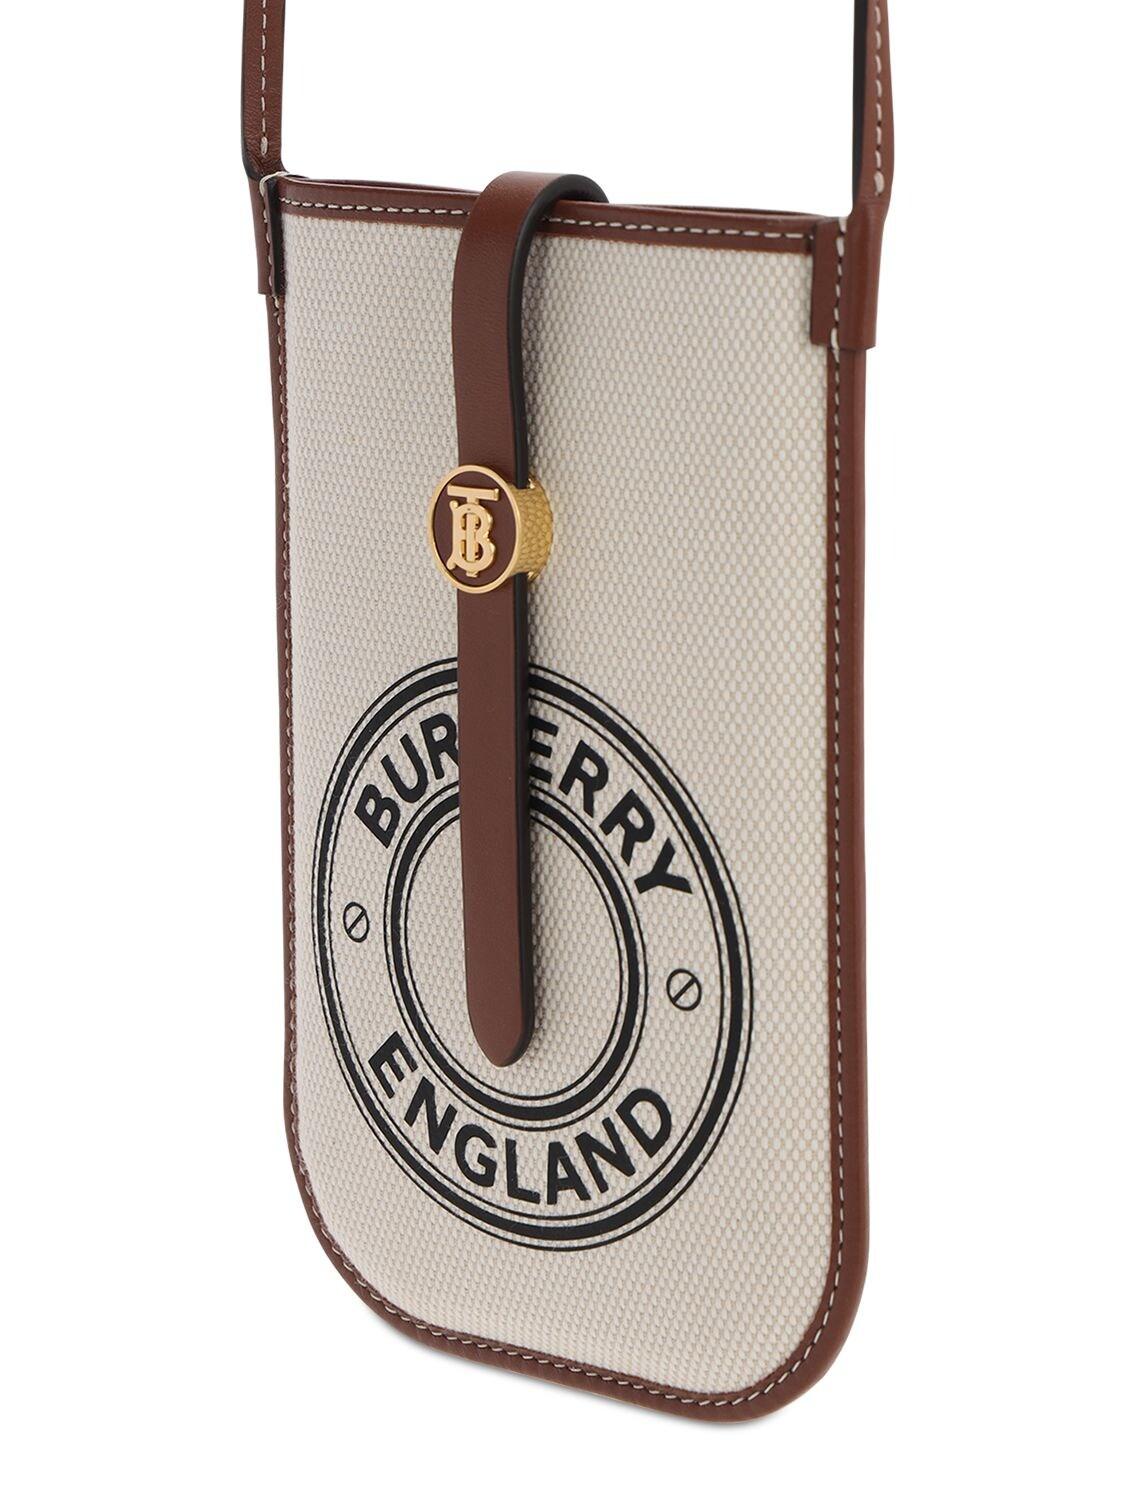 Burberry Canvas Anne Logo Cotton & Leather Phone Bag in White/Tan 